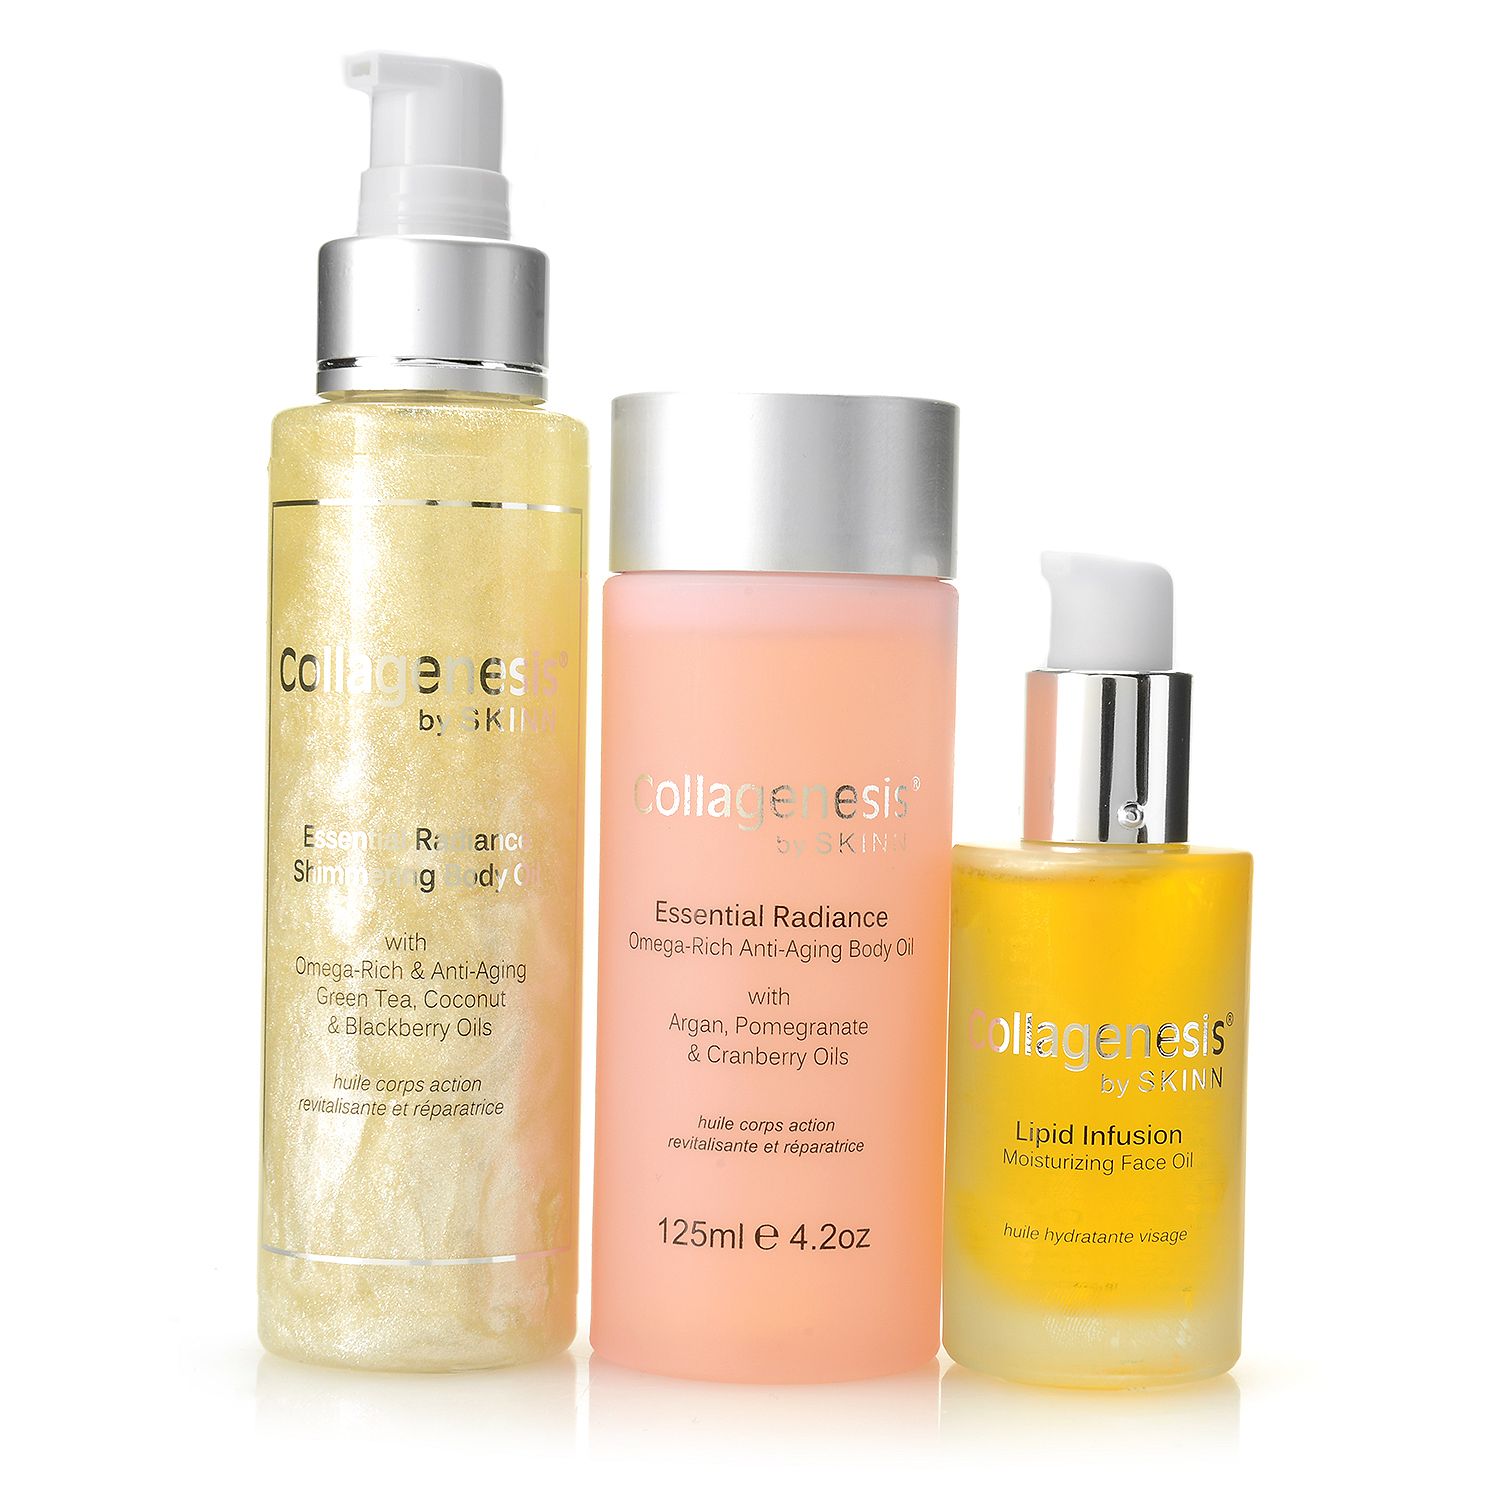 310-702- Skinn Cosmetics Three-Piece Collagenesis Face & Body Oil Collection